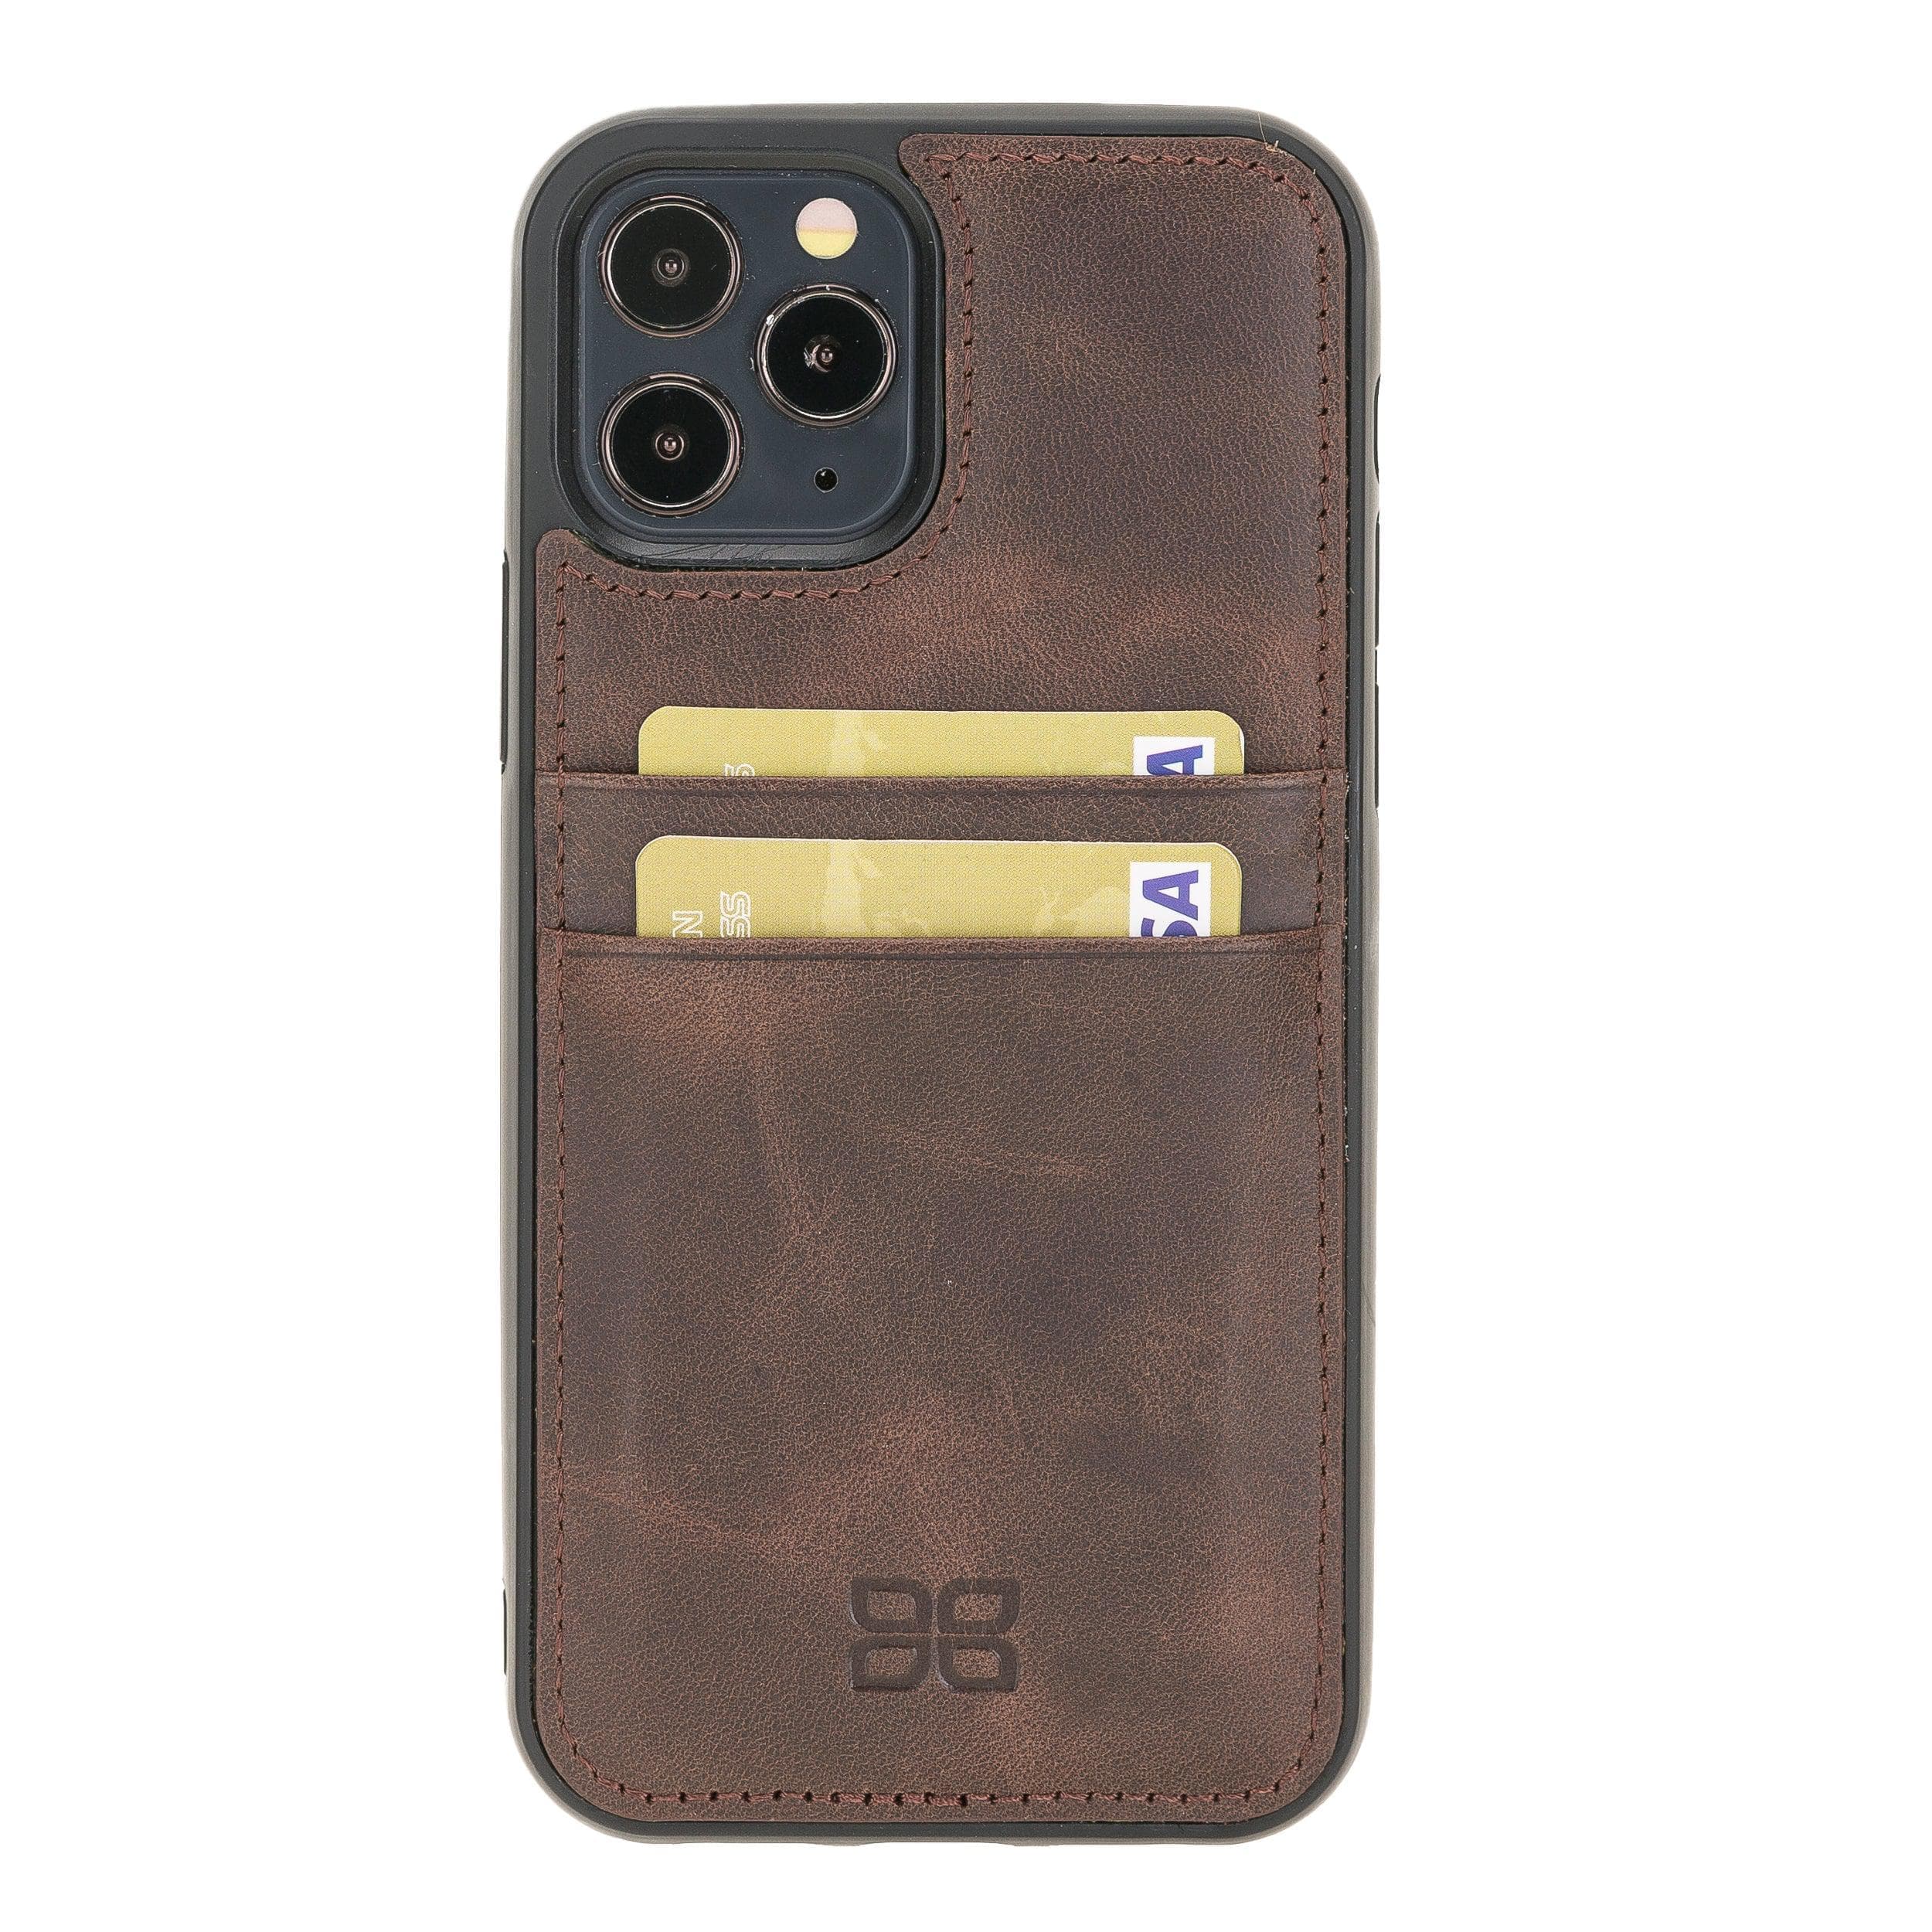 Flexible Leather Back Cover with Card Holder for iPhone 12 Series iPhone 12 Pro / Dark Brown Bouletta LTD